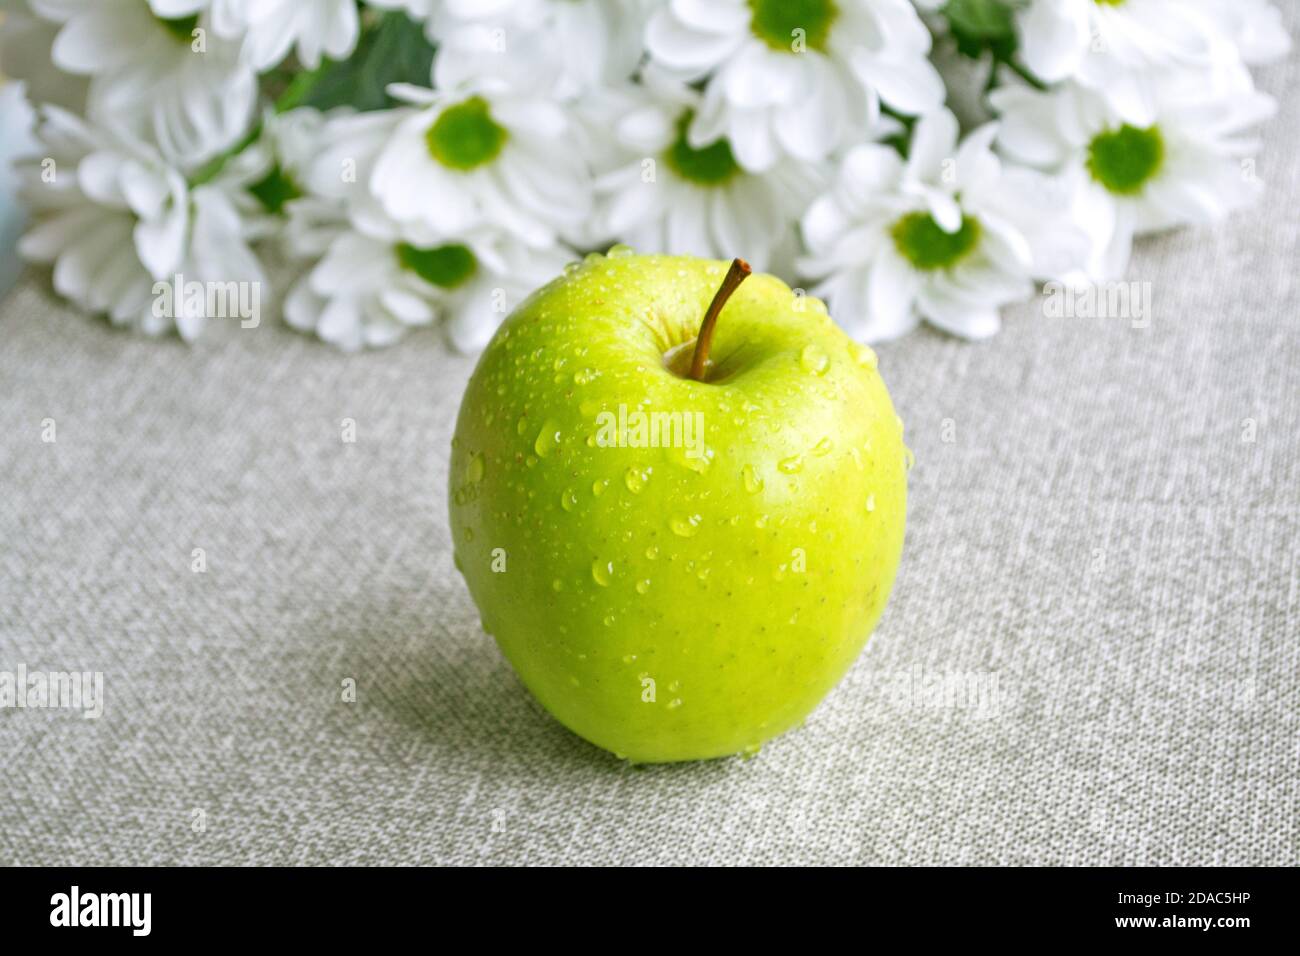 One washed green apple ('Golden') on the table. White flowers at the background. Stock Photo